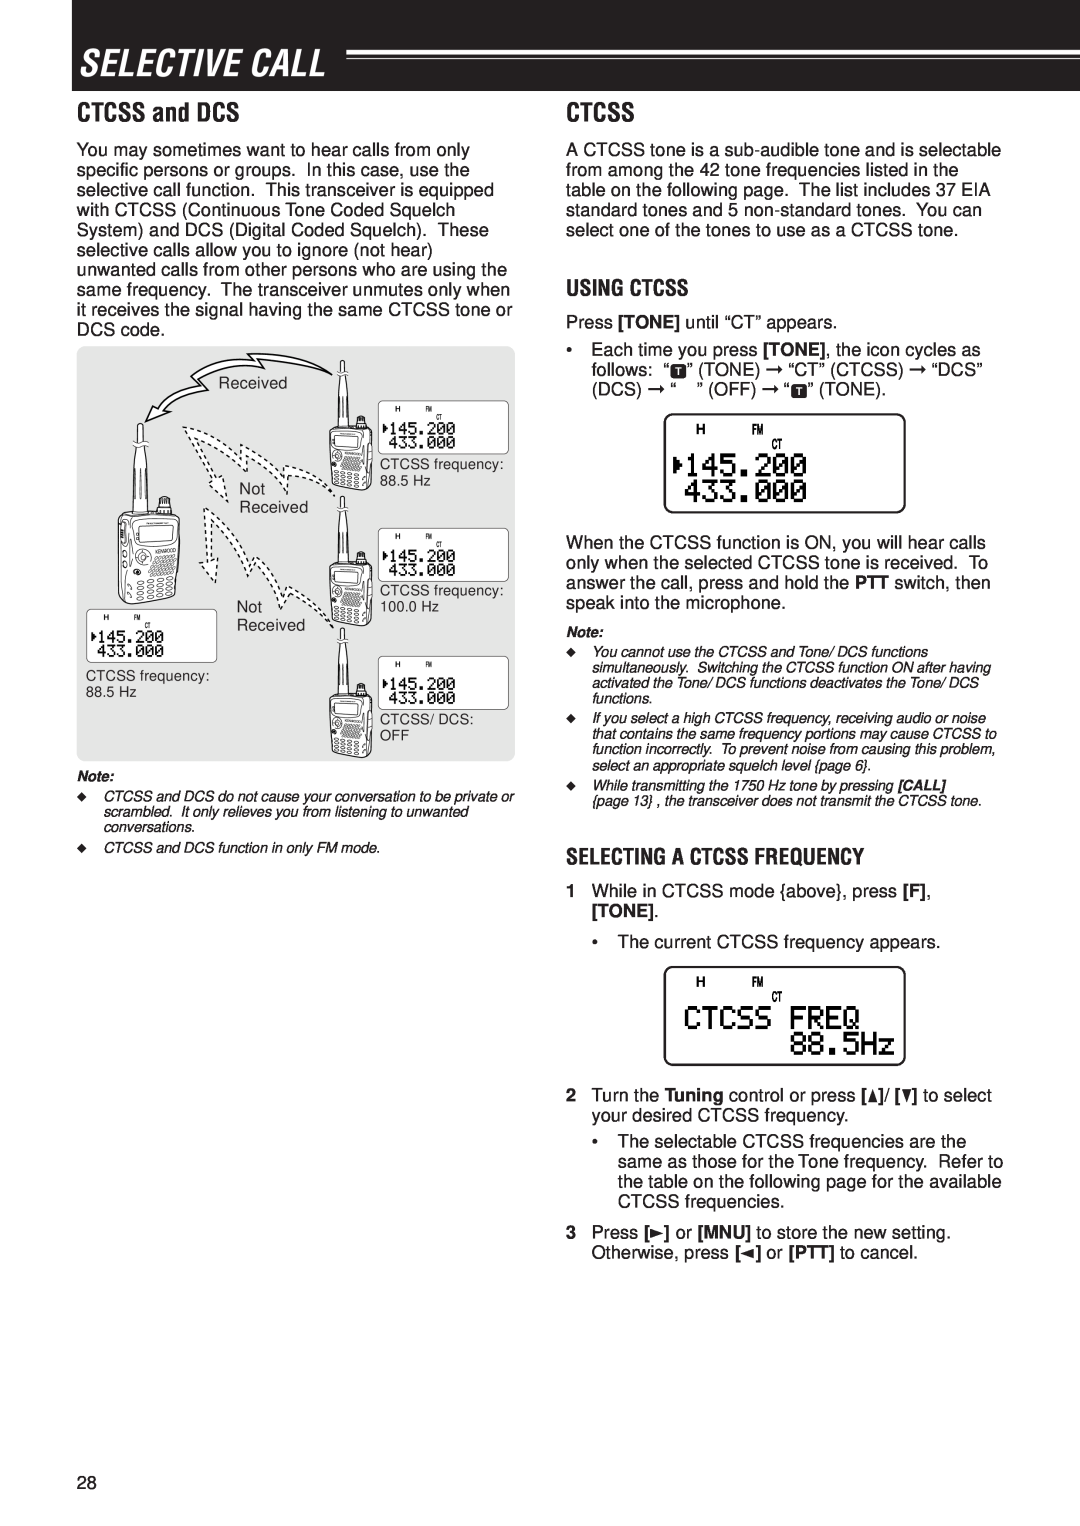 Kenwood TH-F7E, TH-F6A instruction manual Selective Call, CTCSS and DCS, Using Ctcss, Selecting A Ctcss Frequency 